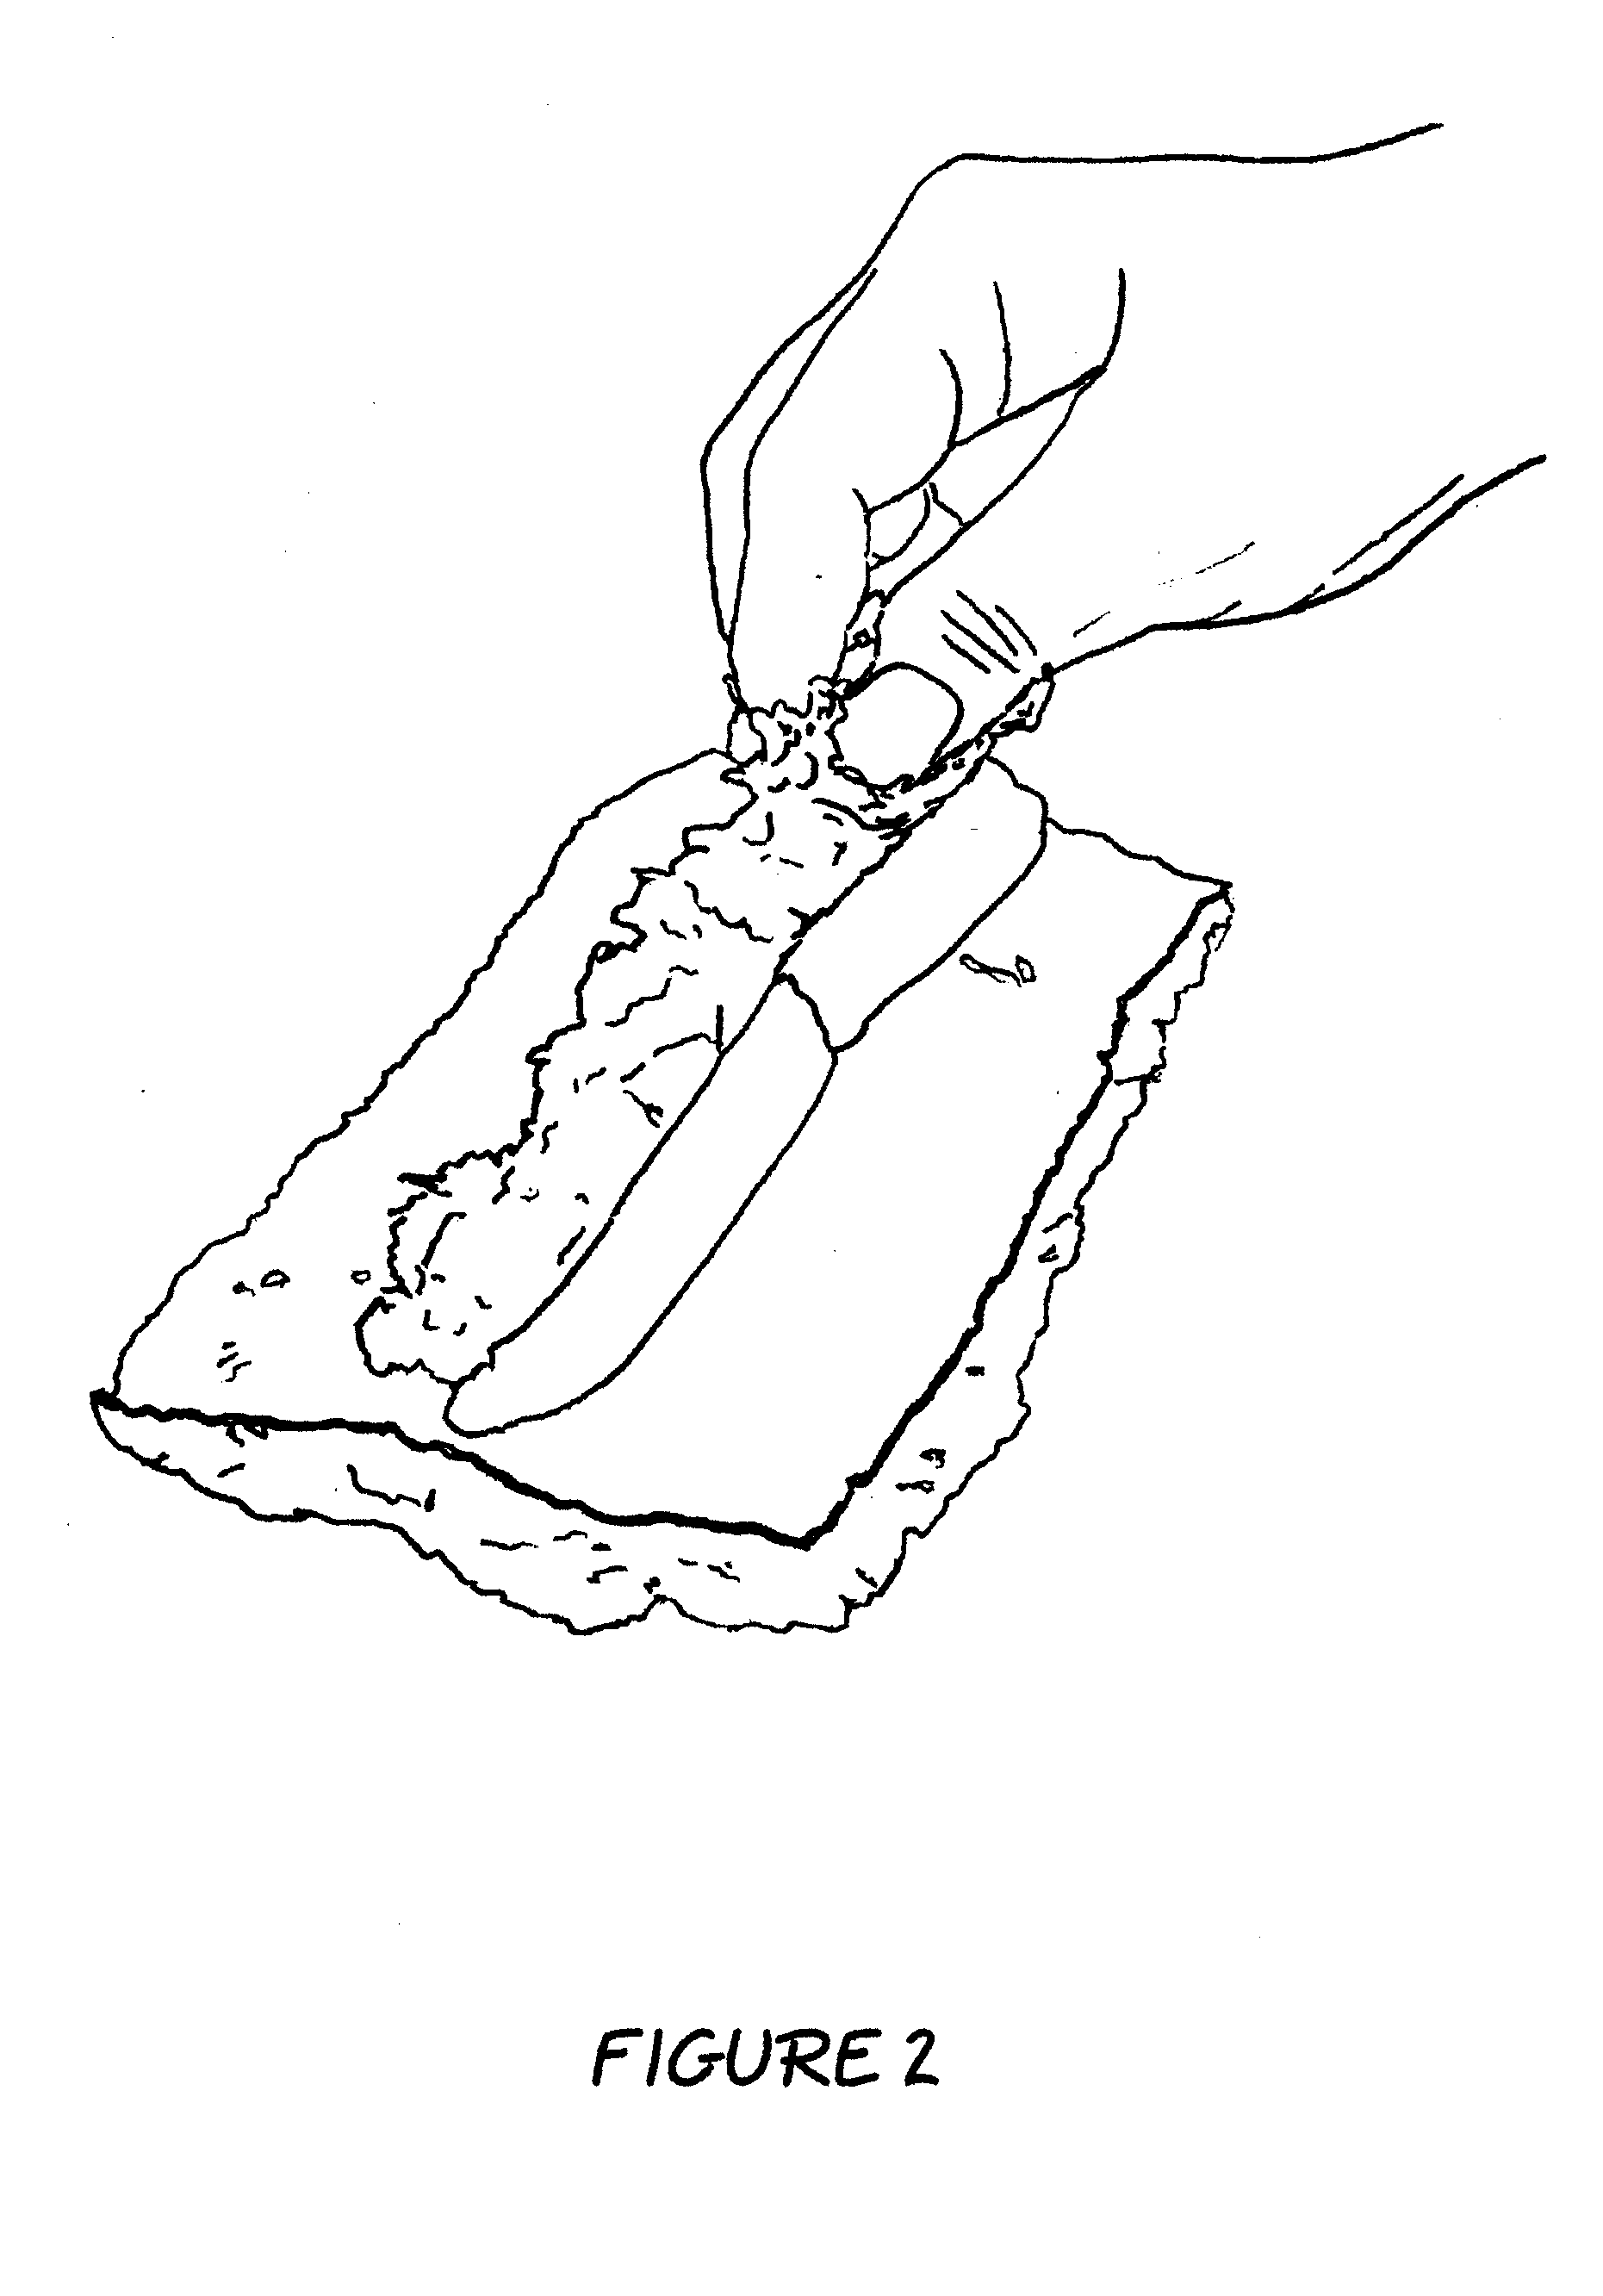 Method and Apparatus For Making Sushi Rolls